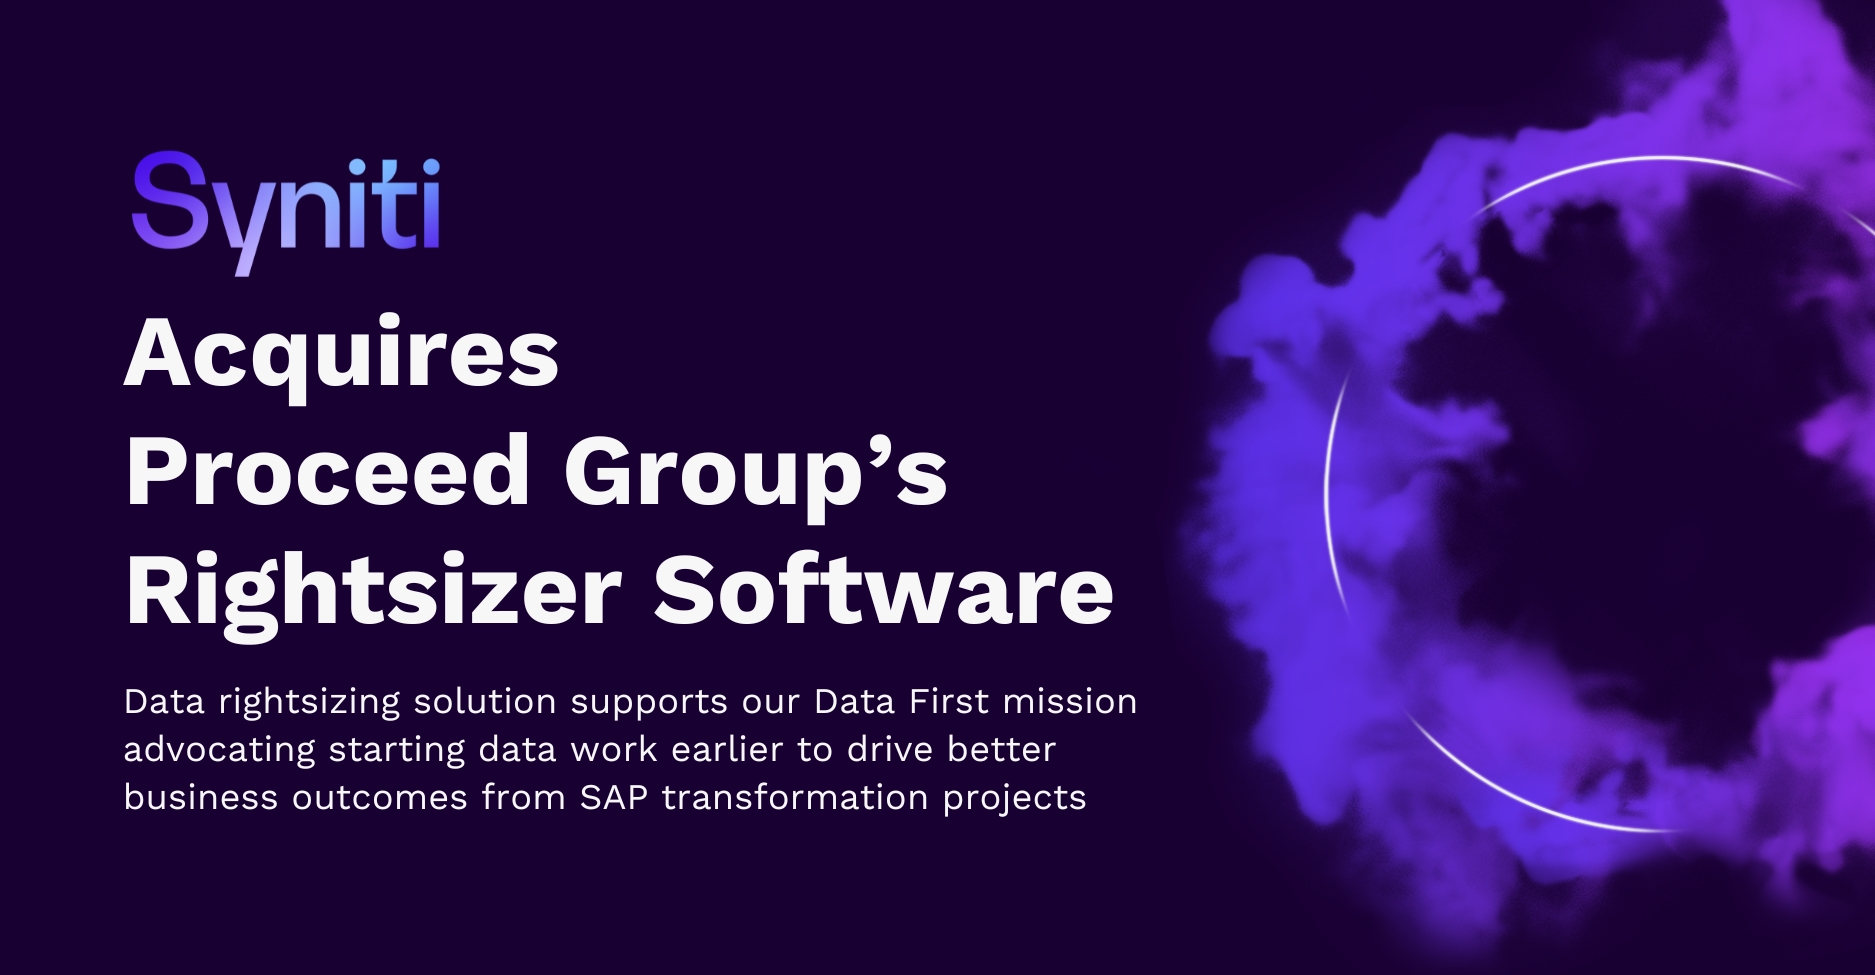 Syniti Acquires Proceed Group’s Rightsizer Software